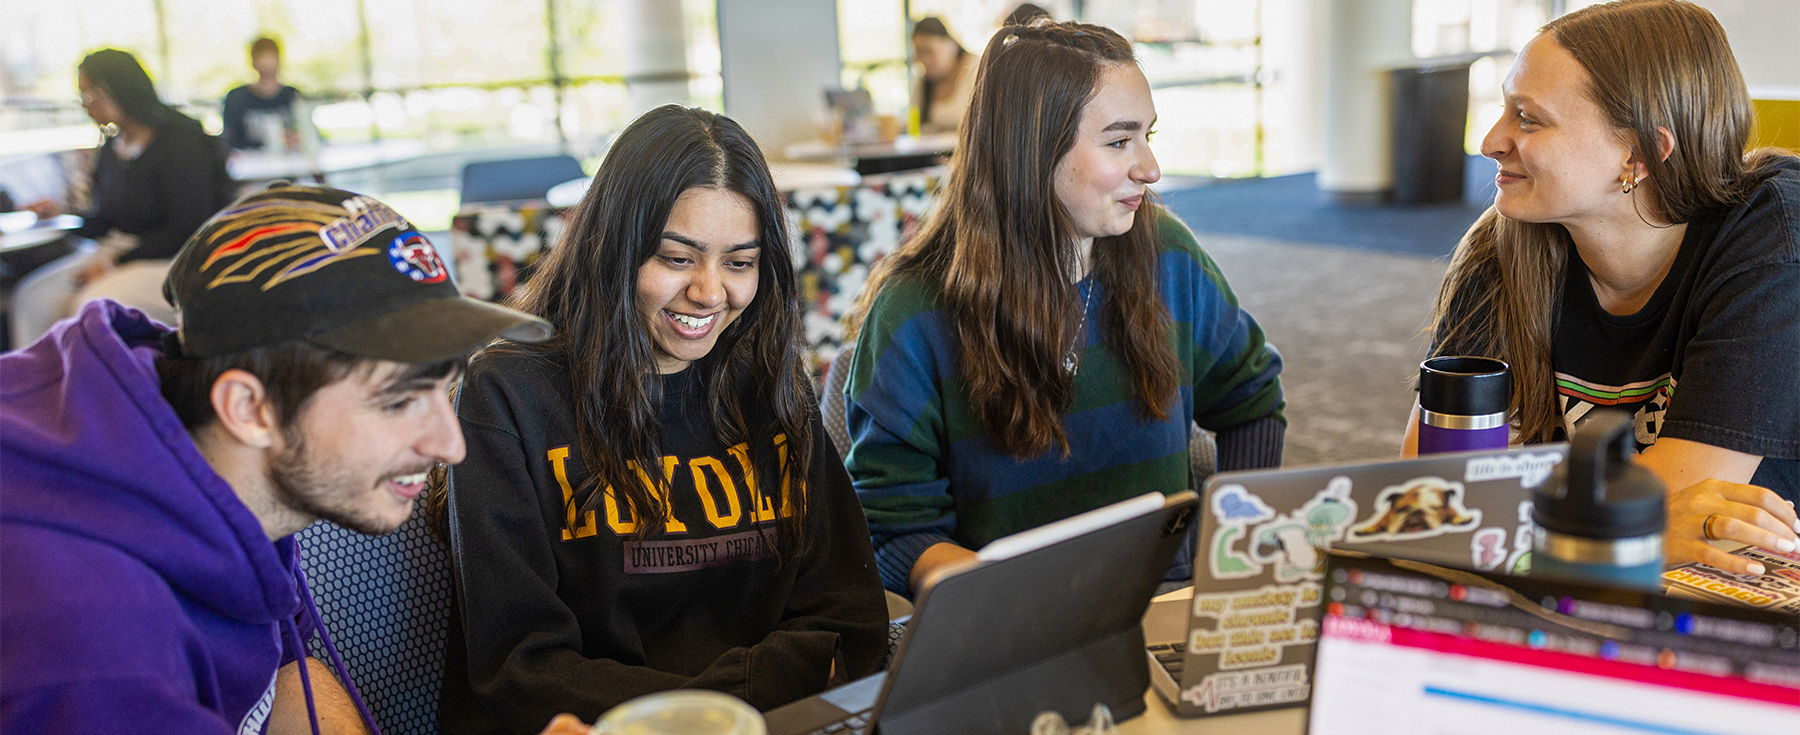 Loyola students work together on lap tops